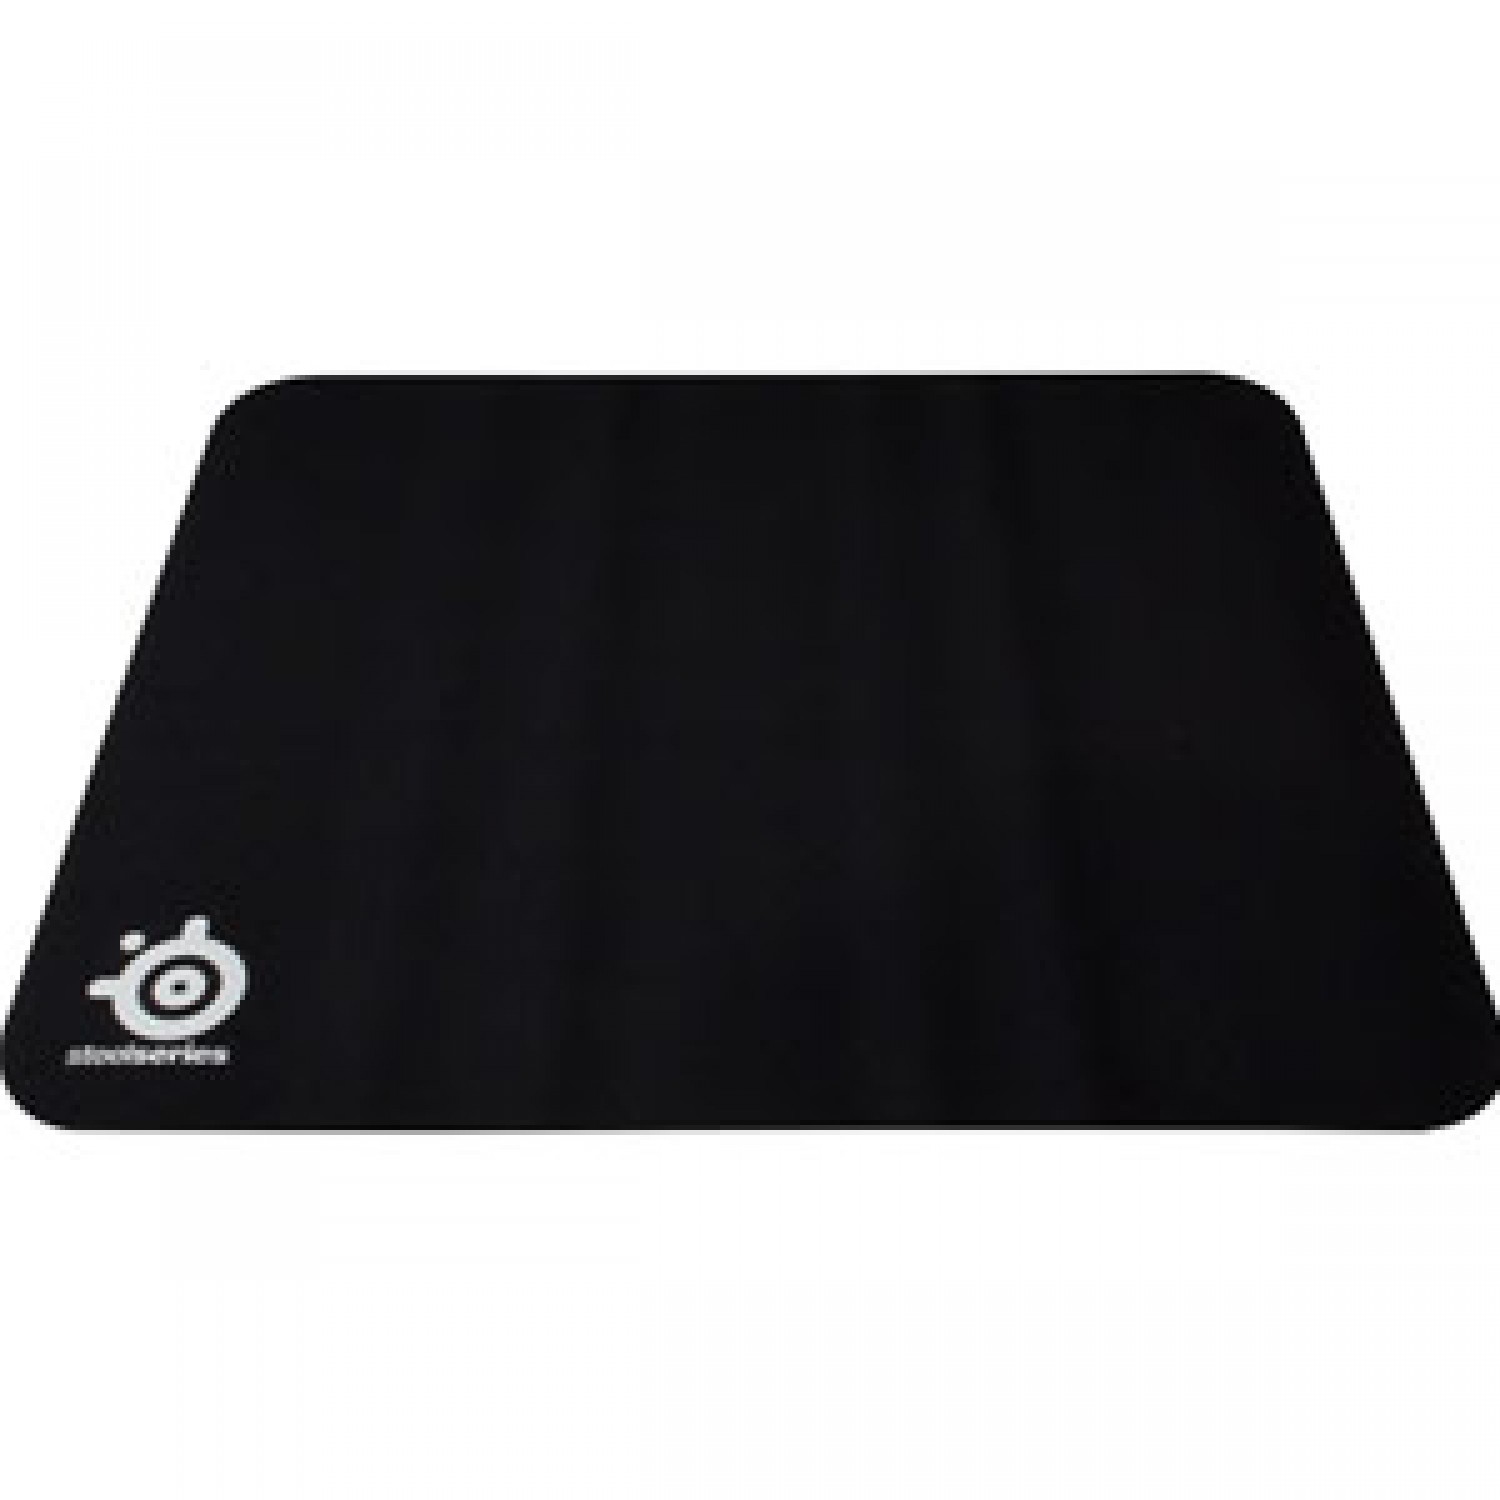 Steelseries Qck Heavy Mouse pad